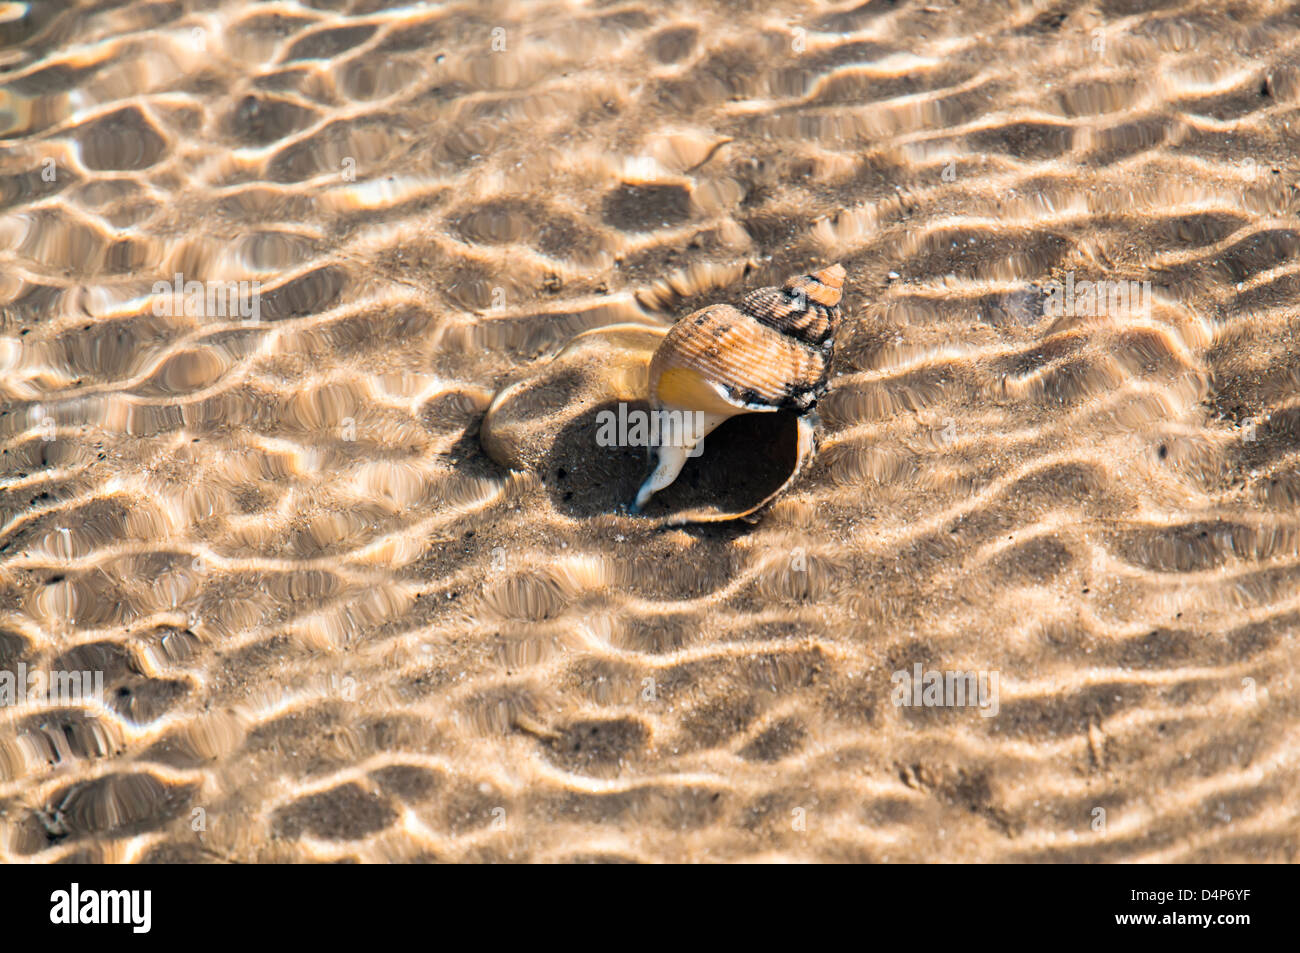 Shell in a rippling pool Stock Photo